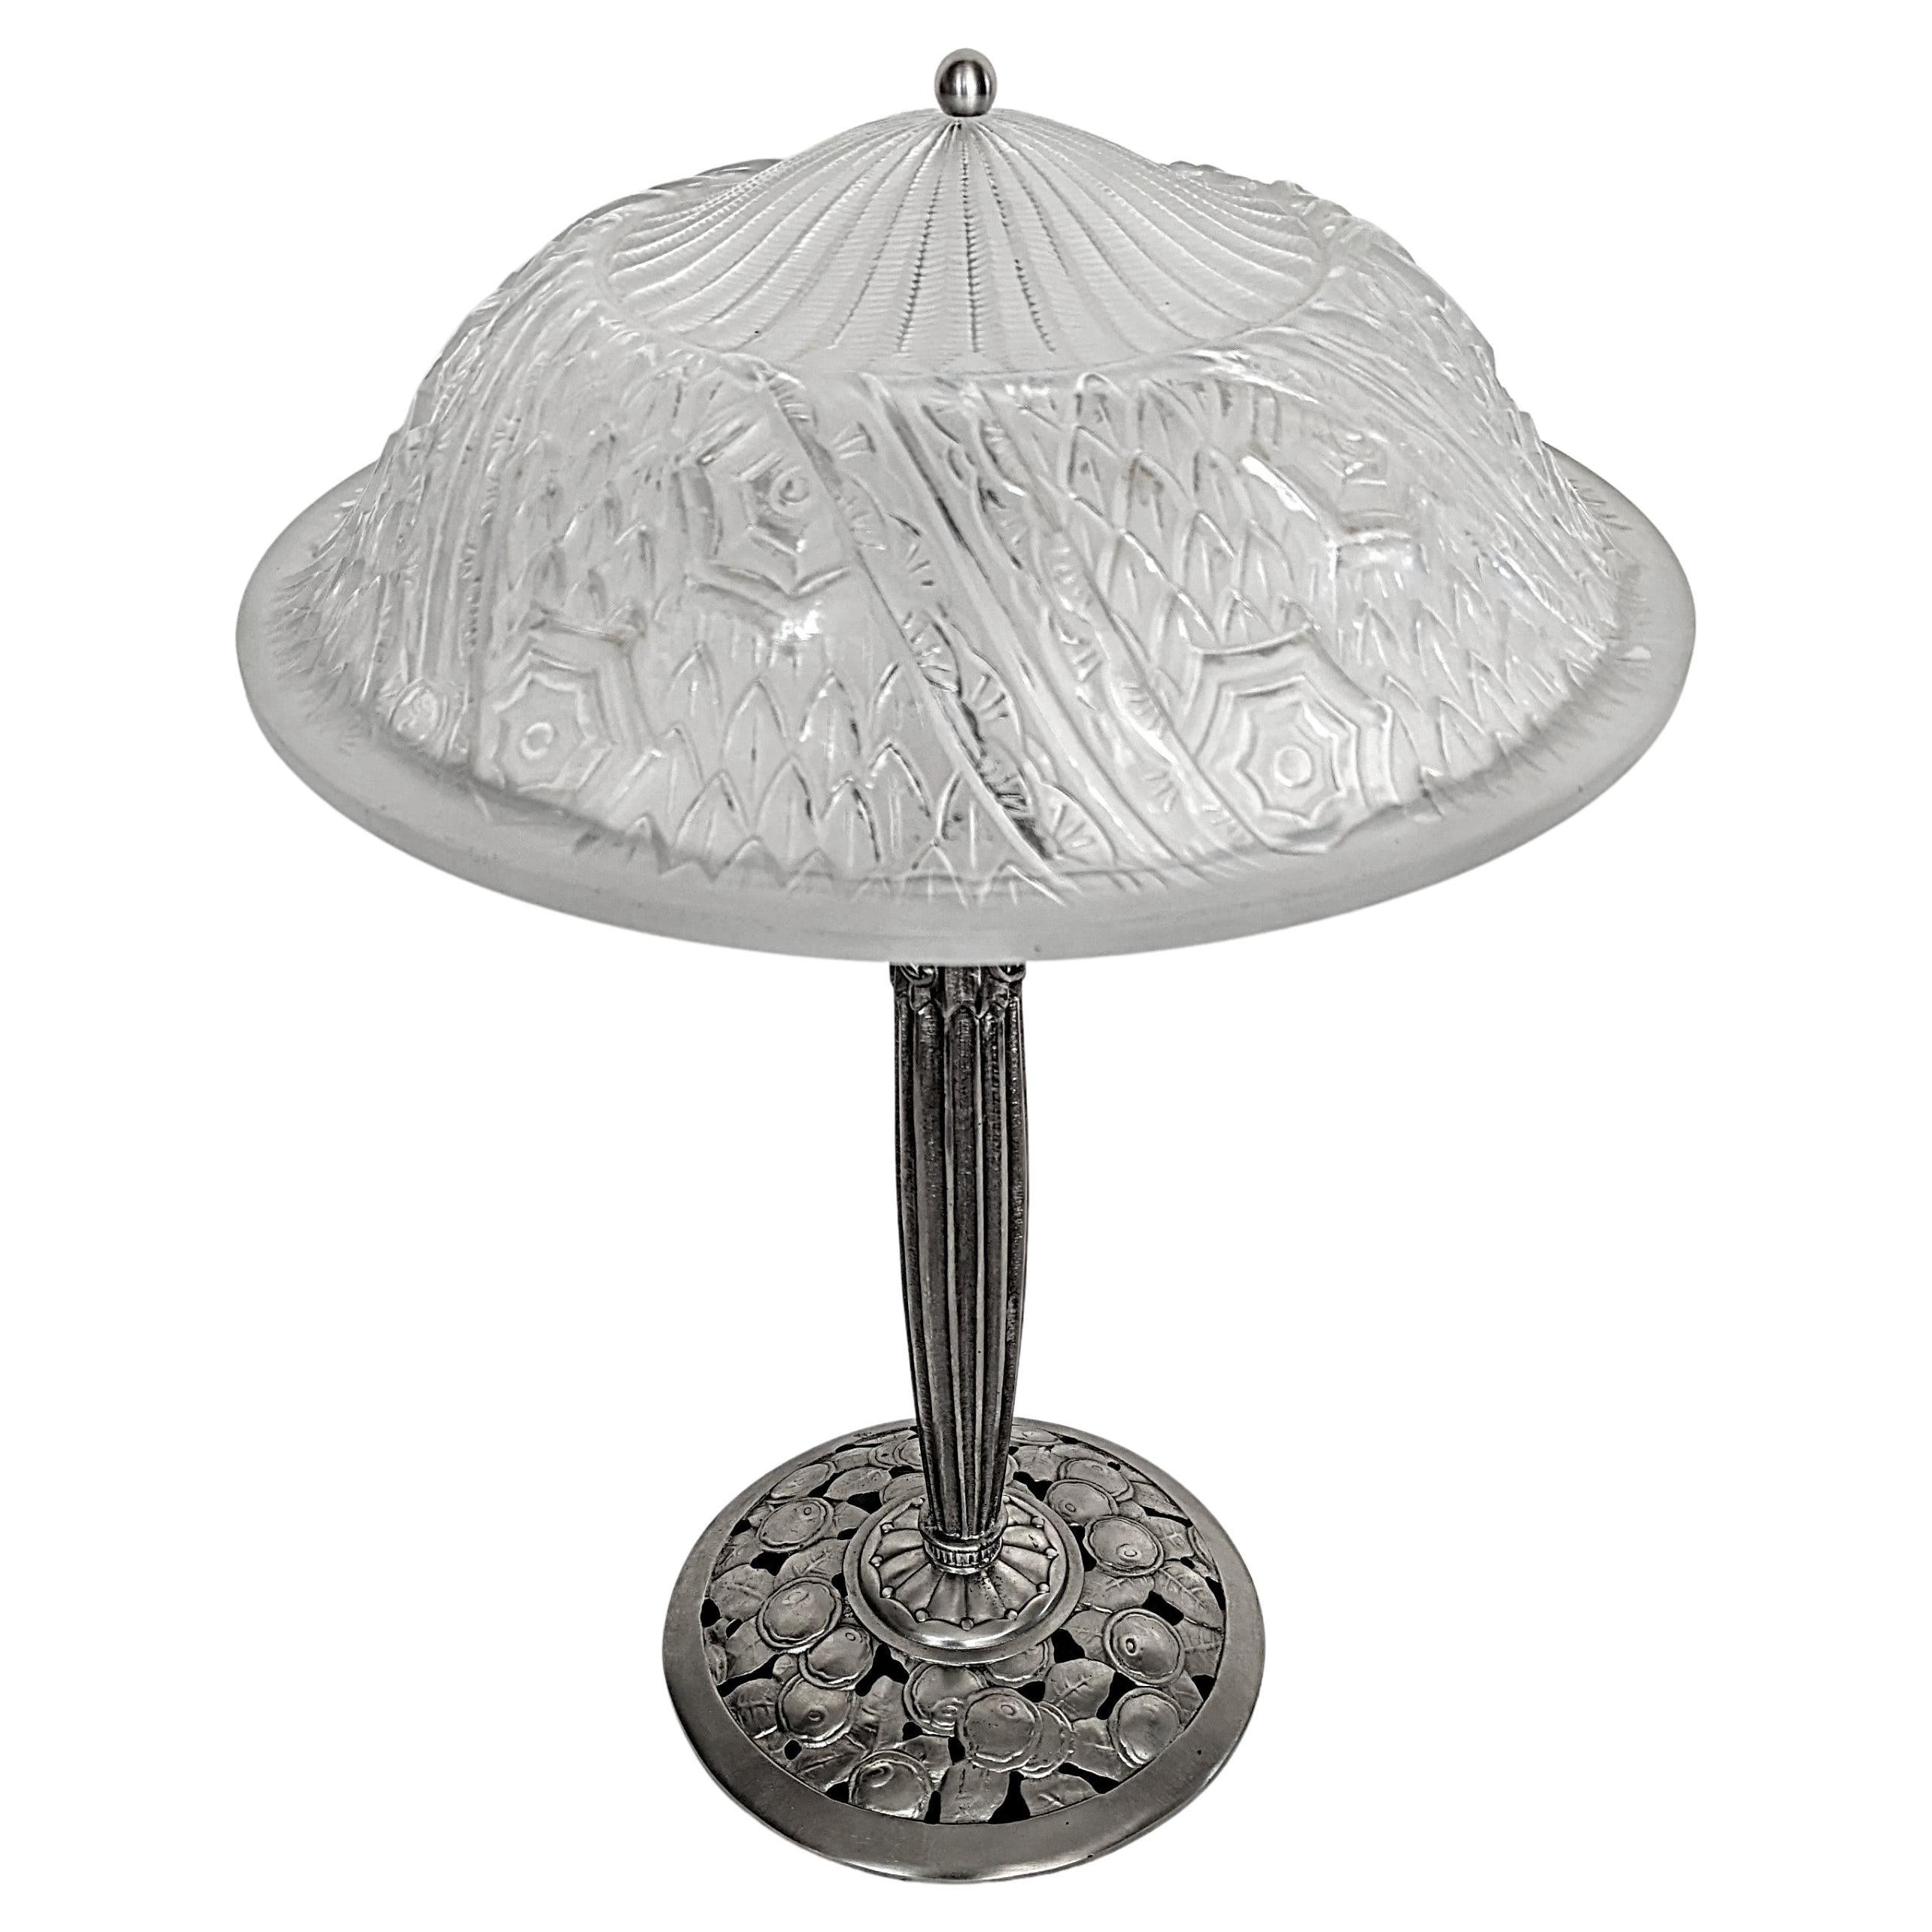 Cast French Art Deco Table Lamp by Schneider